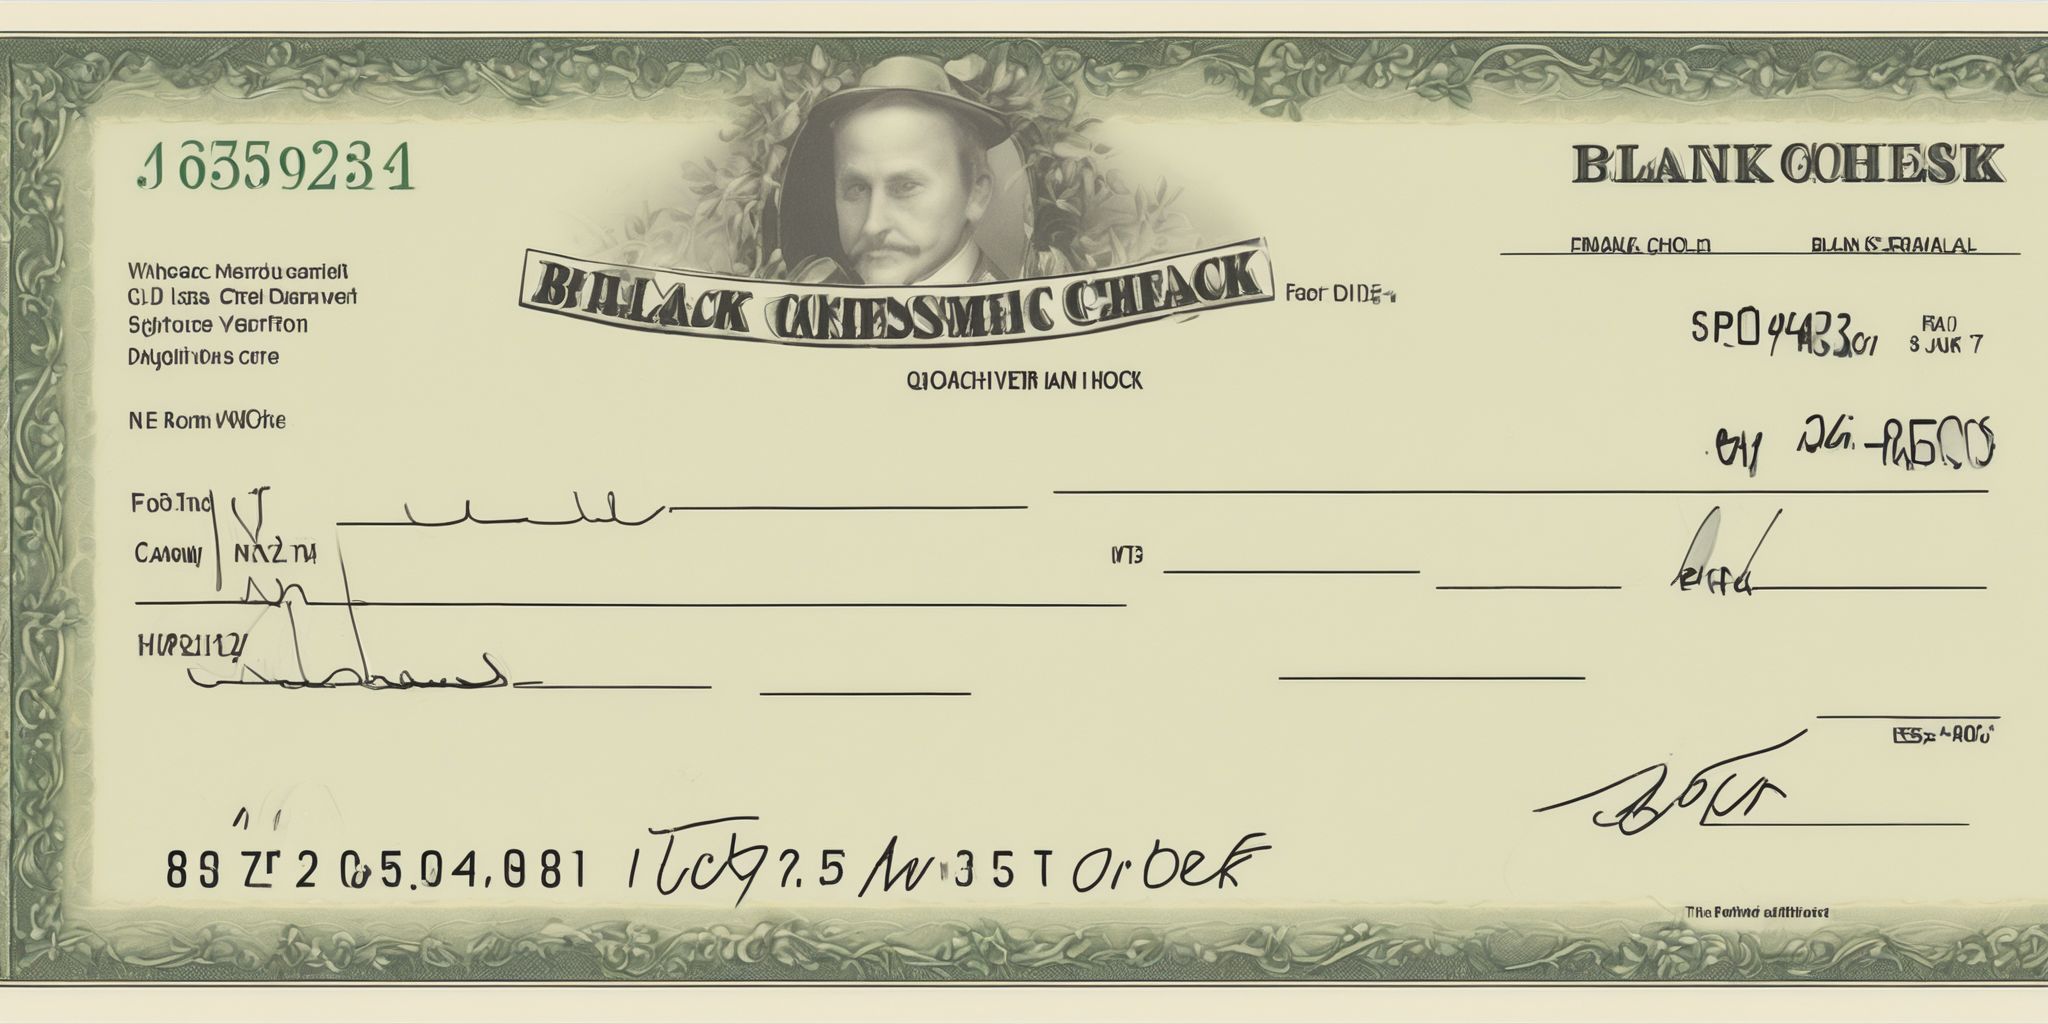 Blank check  in realistic, photographic style